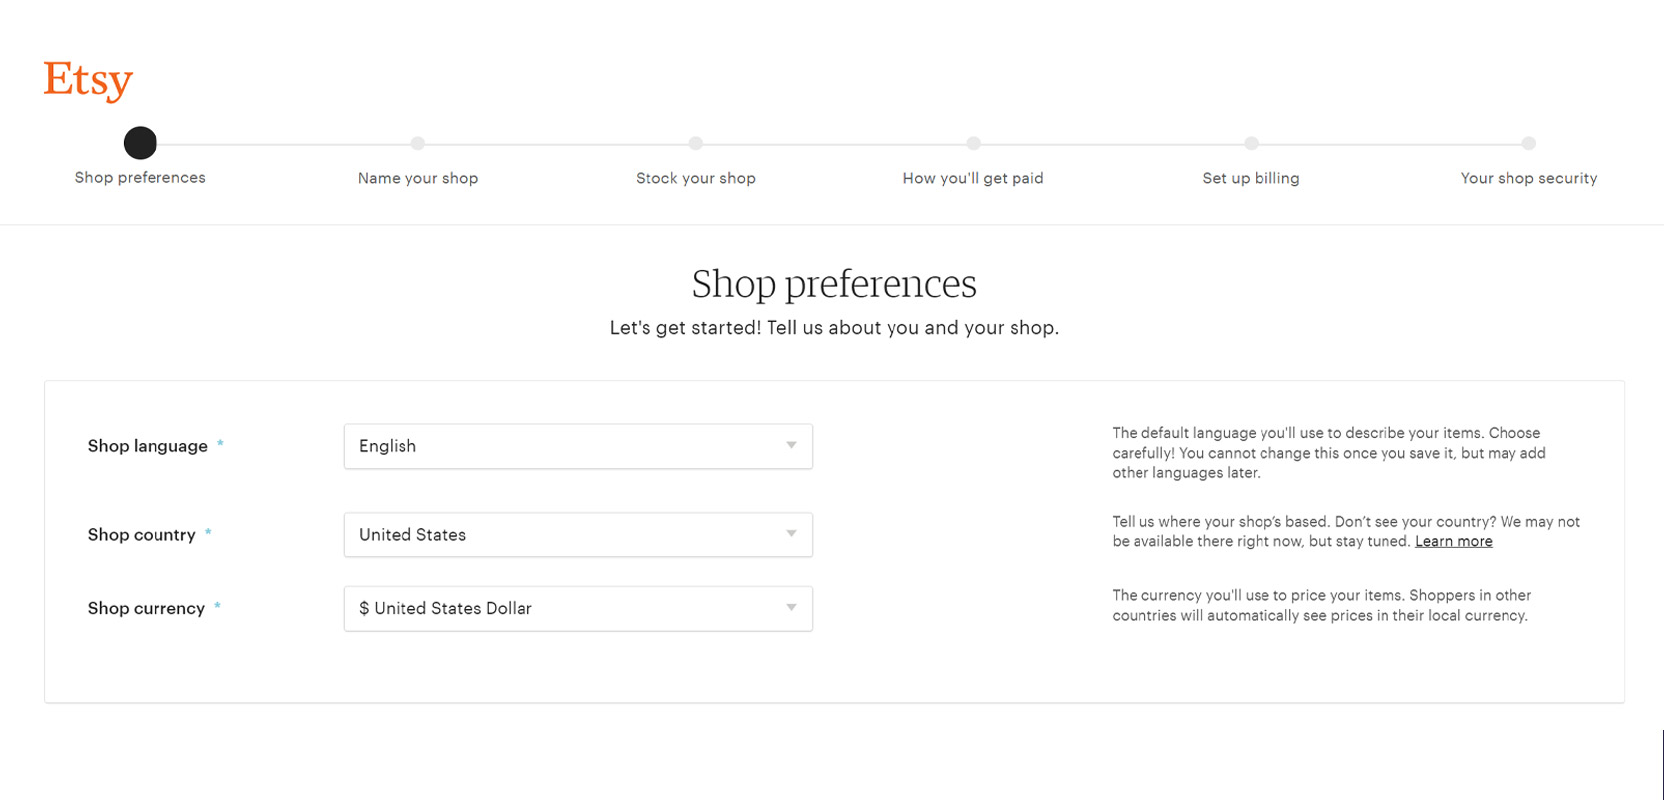 Screenshot of the Etsy shop preferences page